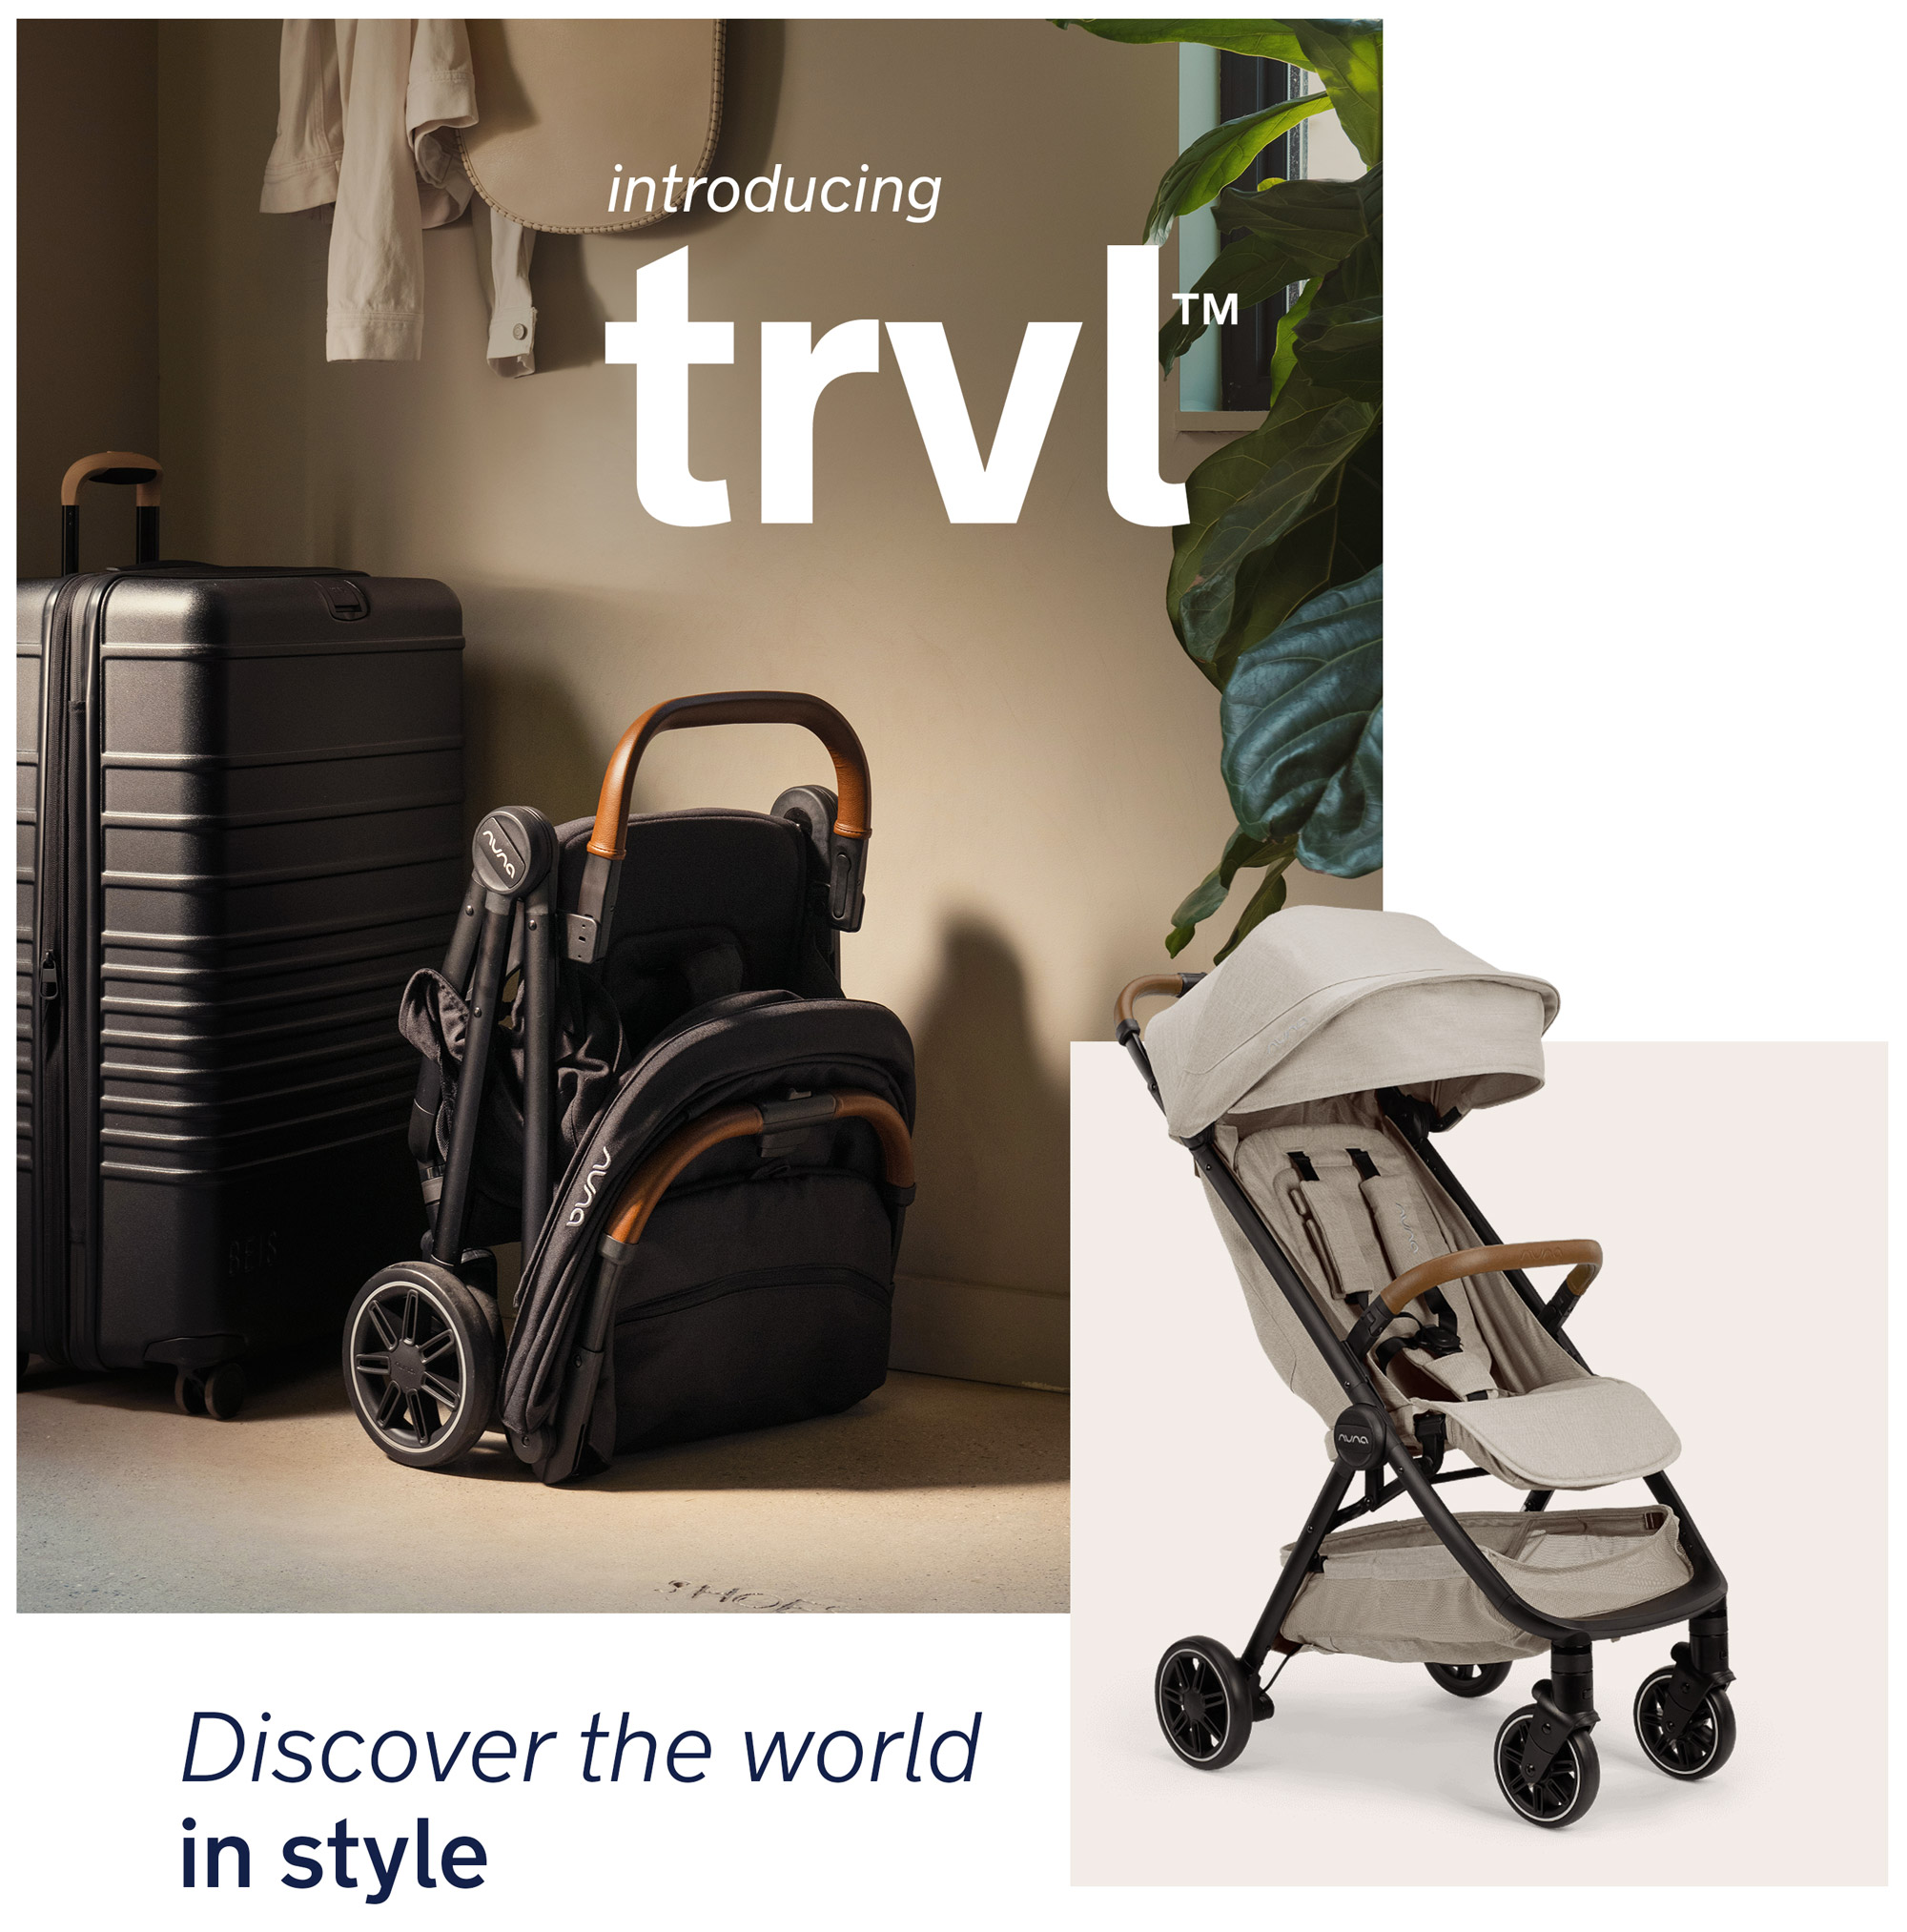 Introducing TRVL, Discover the world in style. Nuna's compact travel stroller is available in Caviar and Hazelwood.